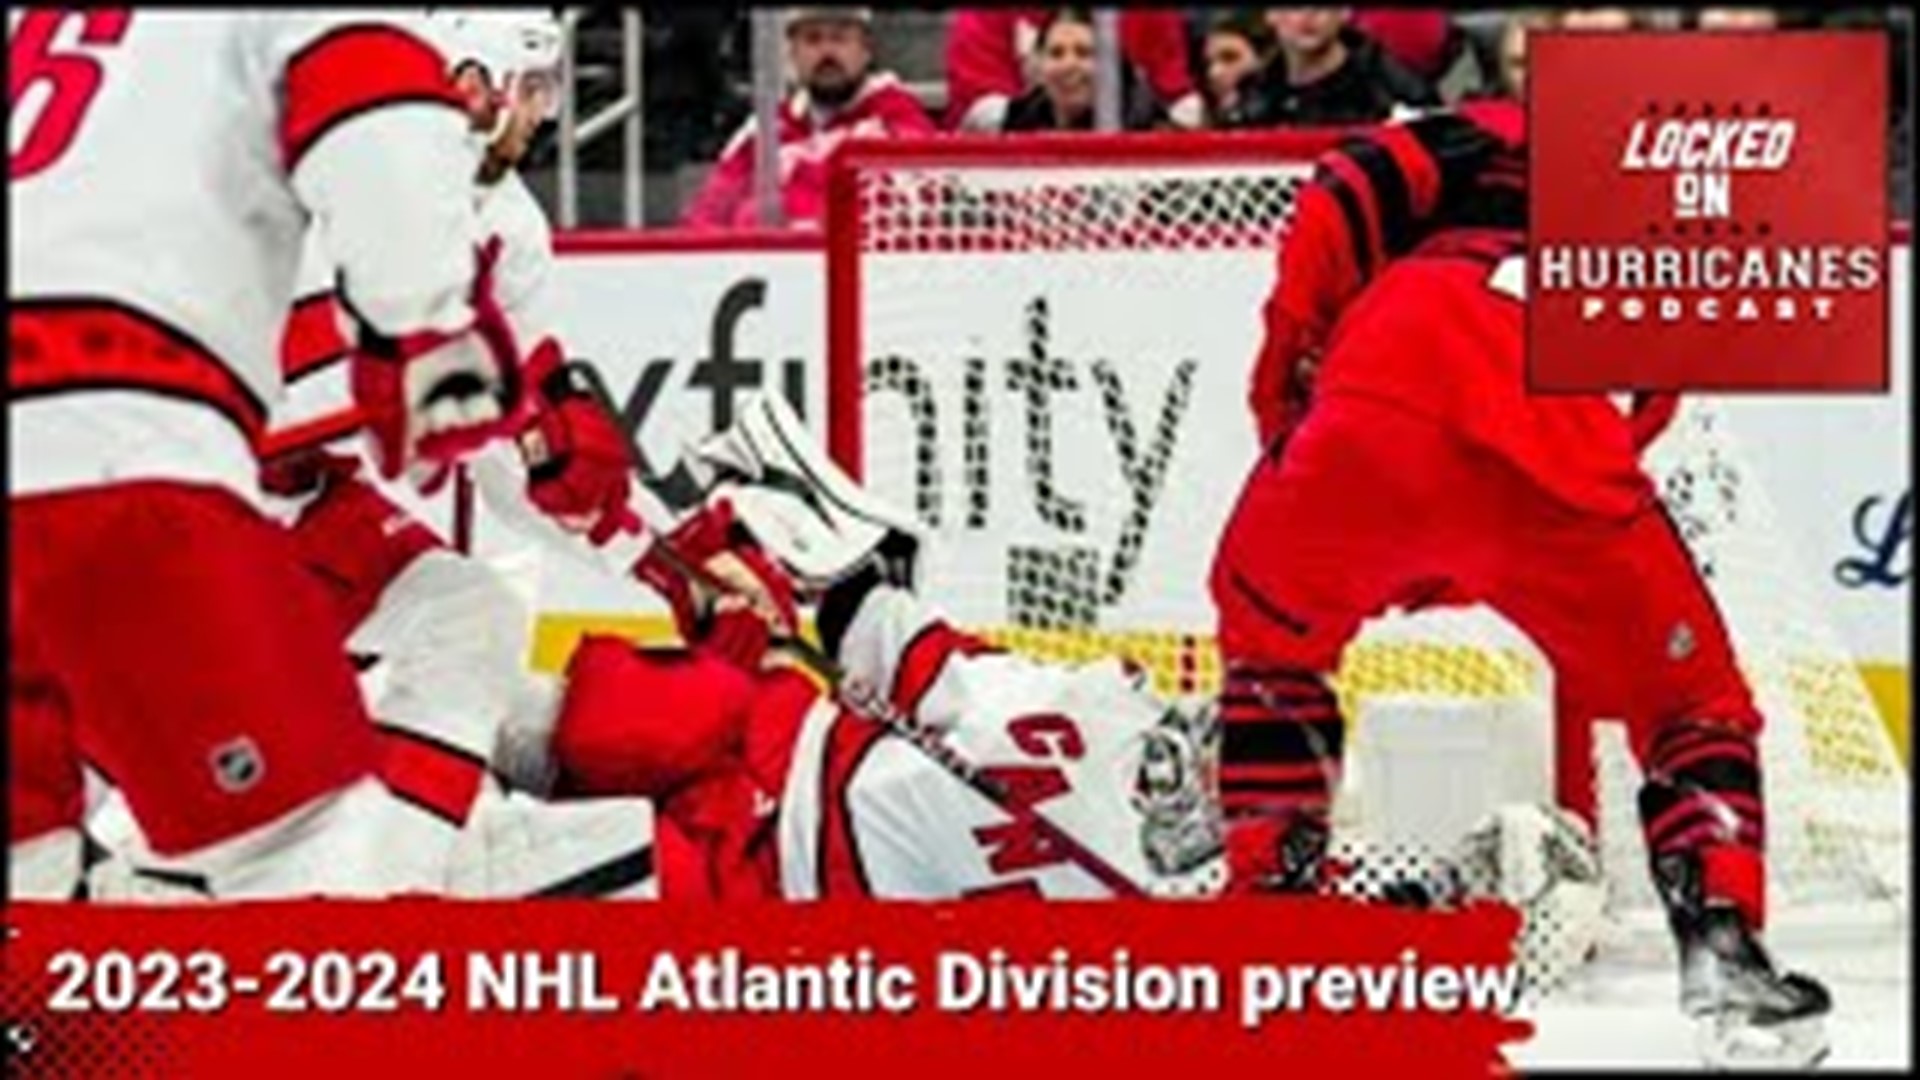 We continue our division previews by checking out the Atlantic Division.  That and more on Locked On Hurricanes.